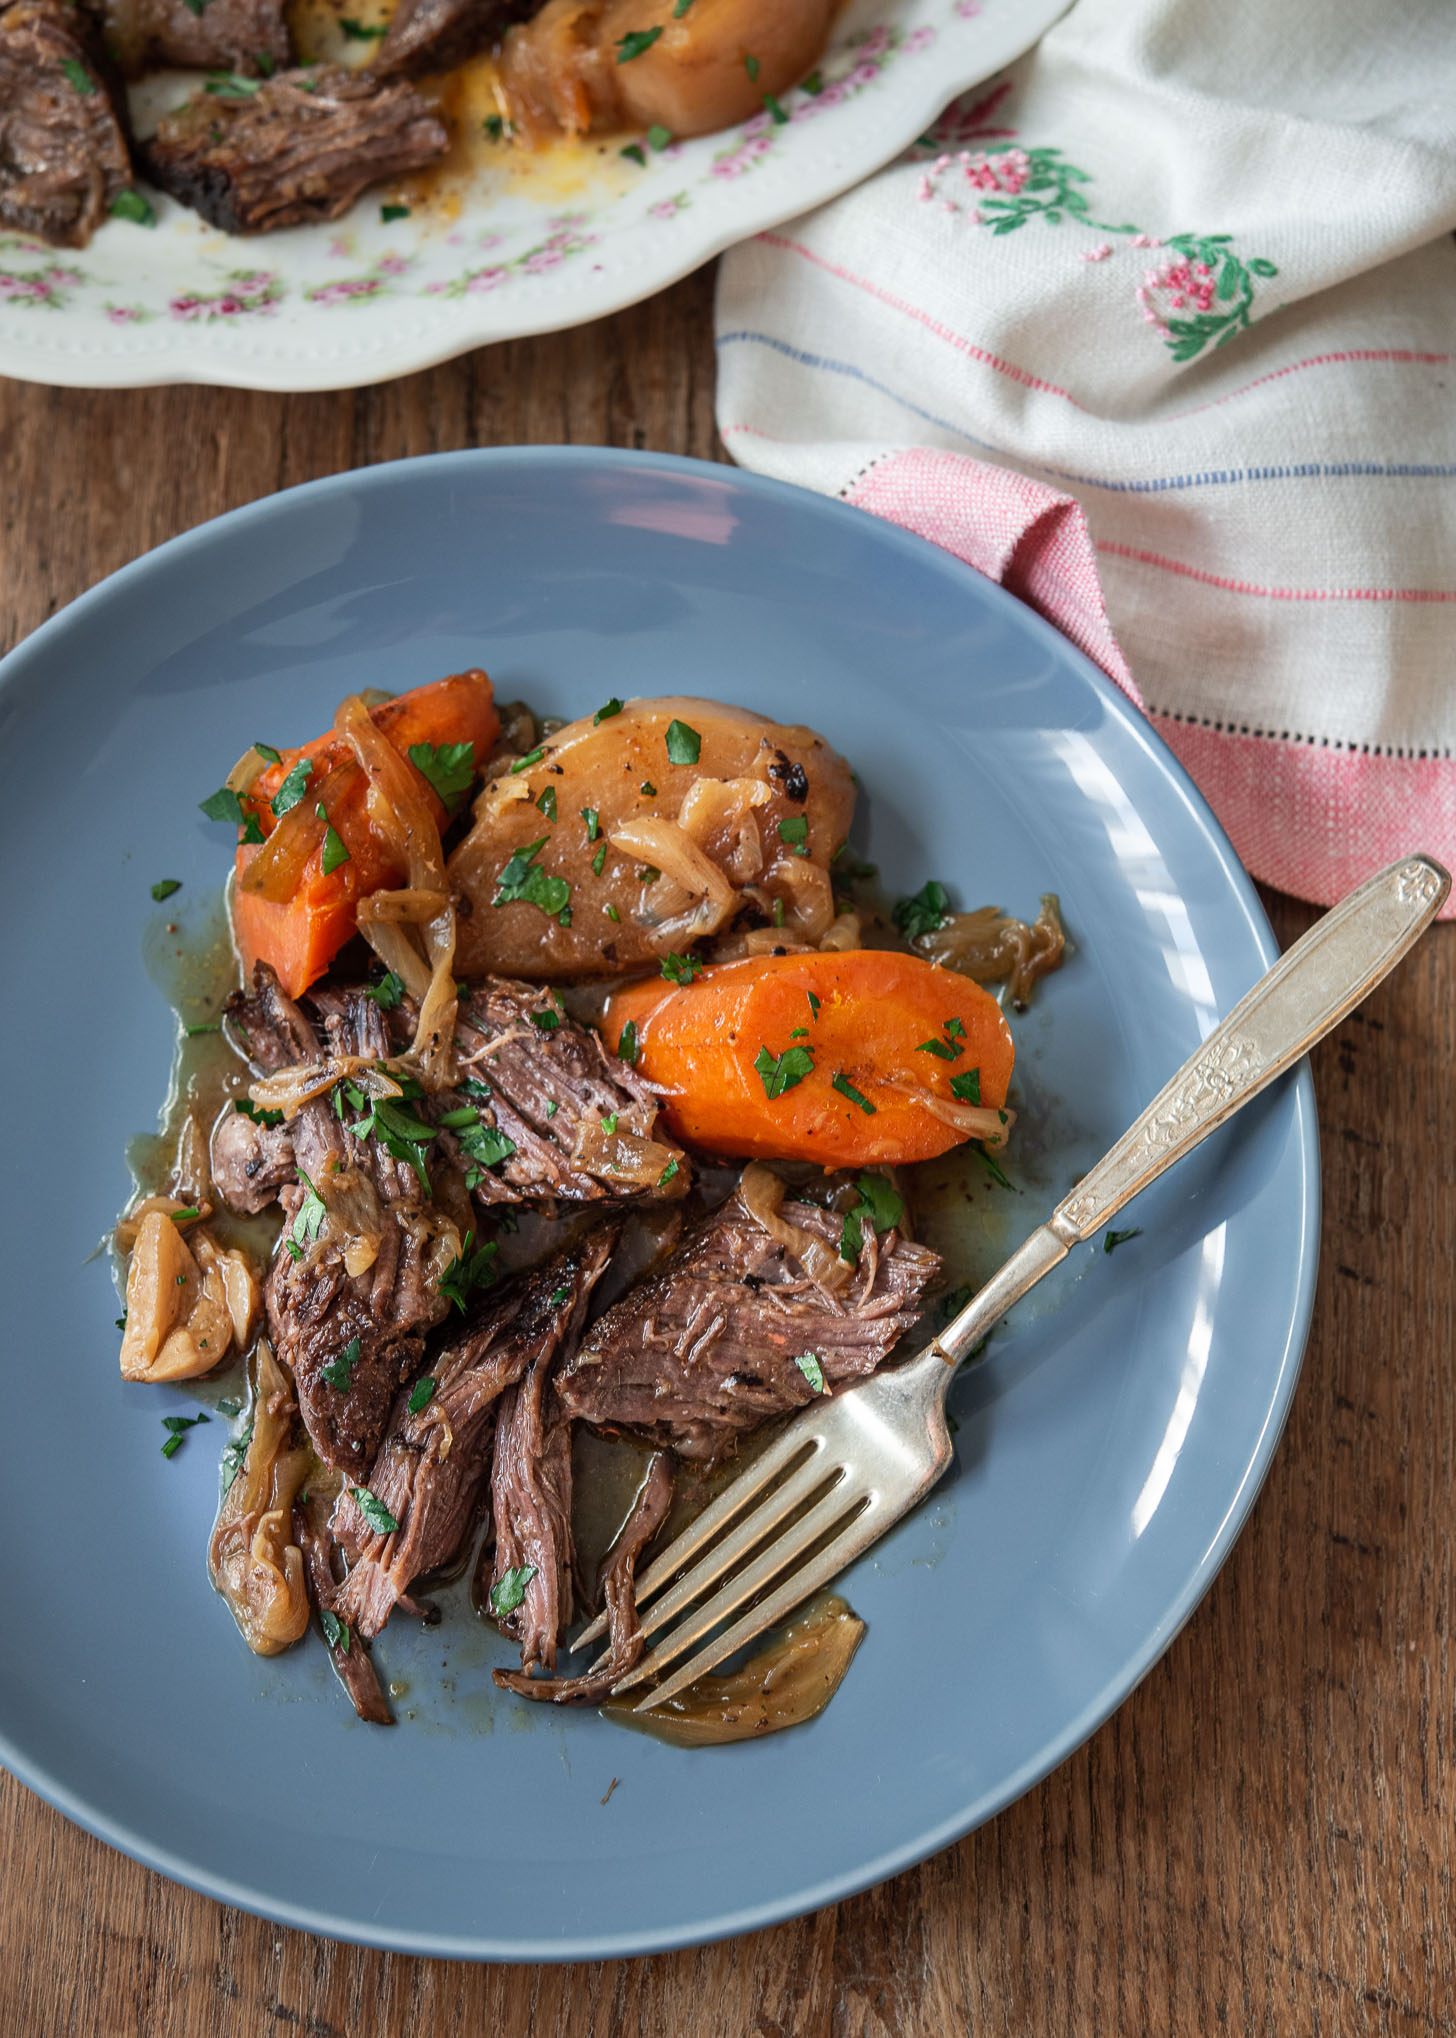 Spiced beef pot roast with carrot and turnip is served on a blue plate.